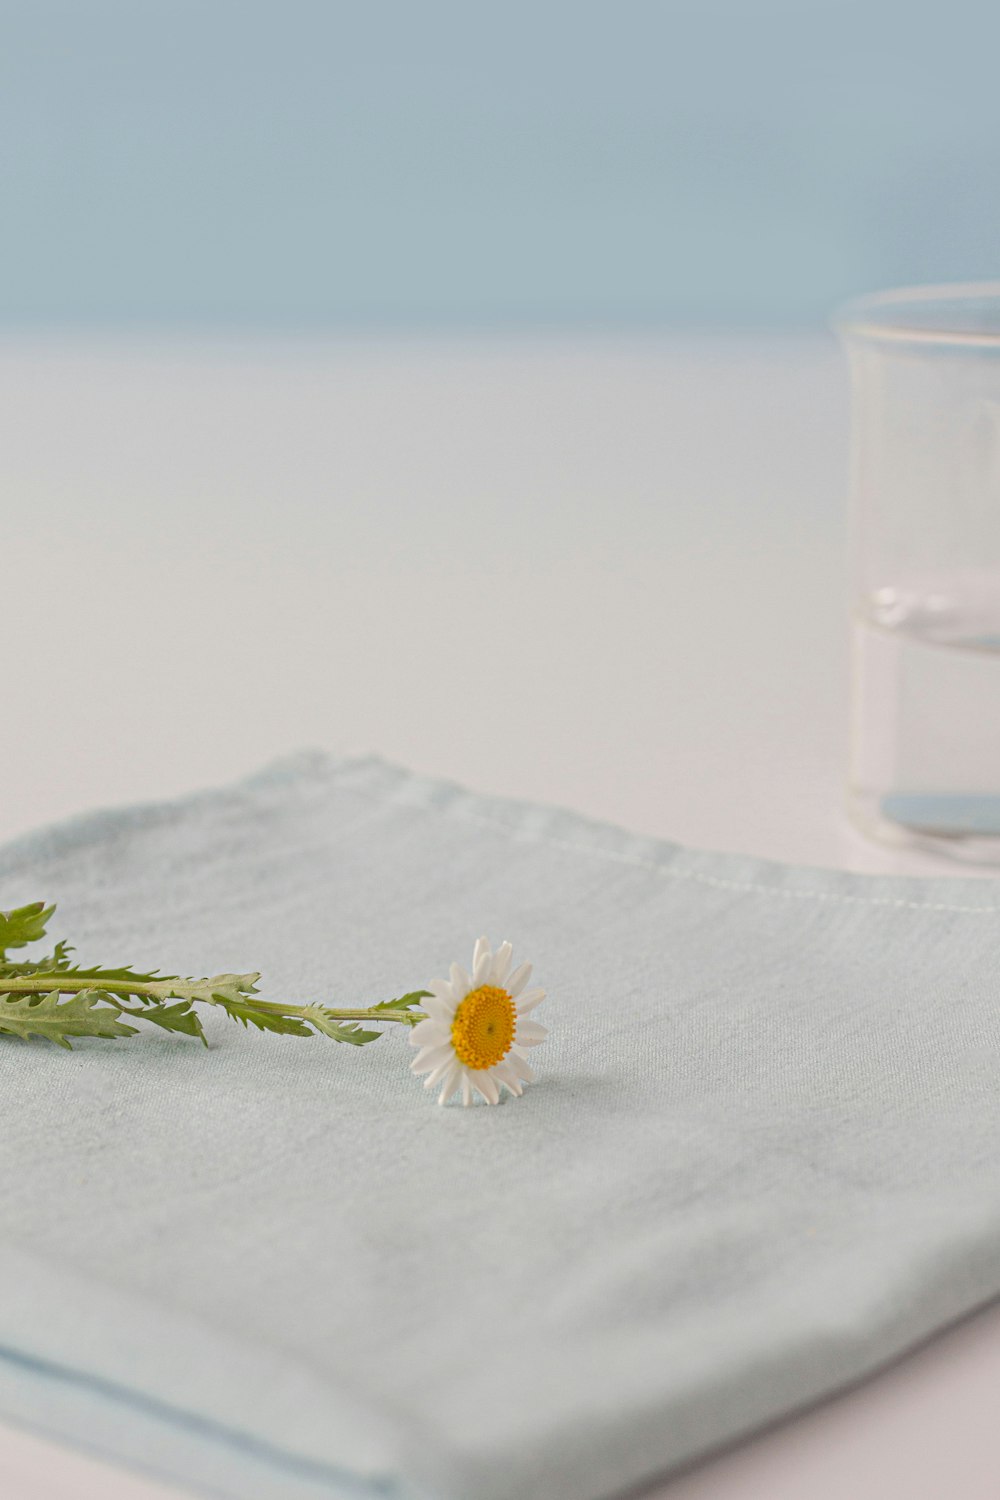 a single flower on a napkin next to a glass of water